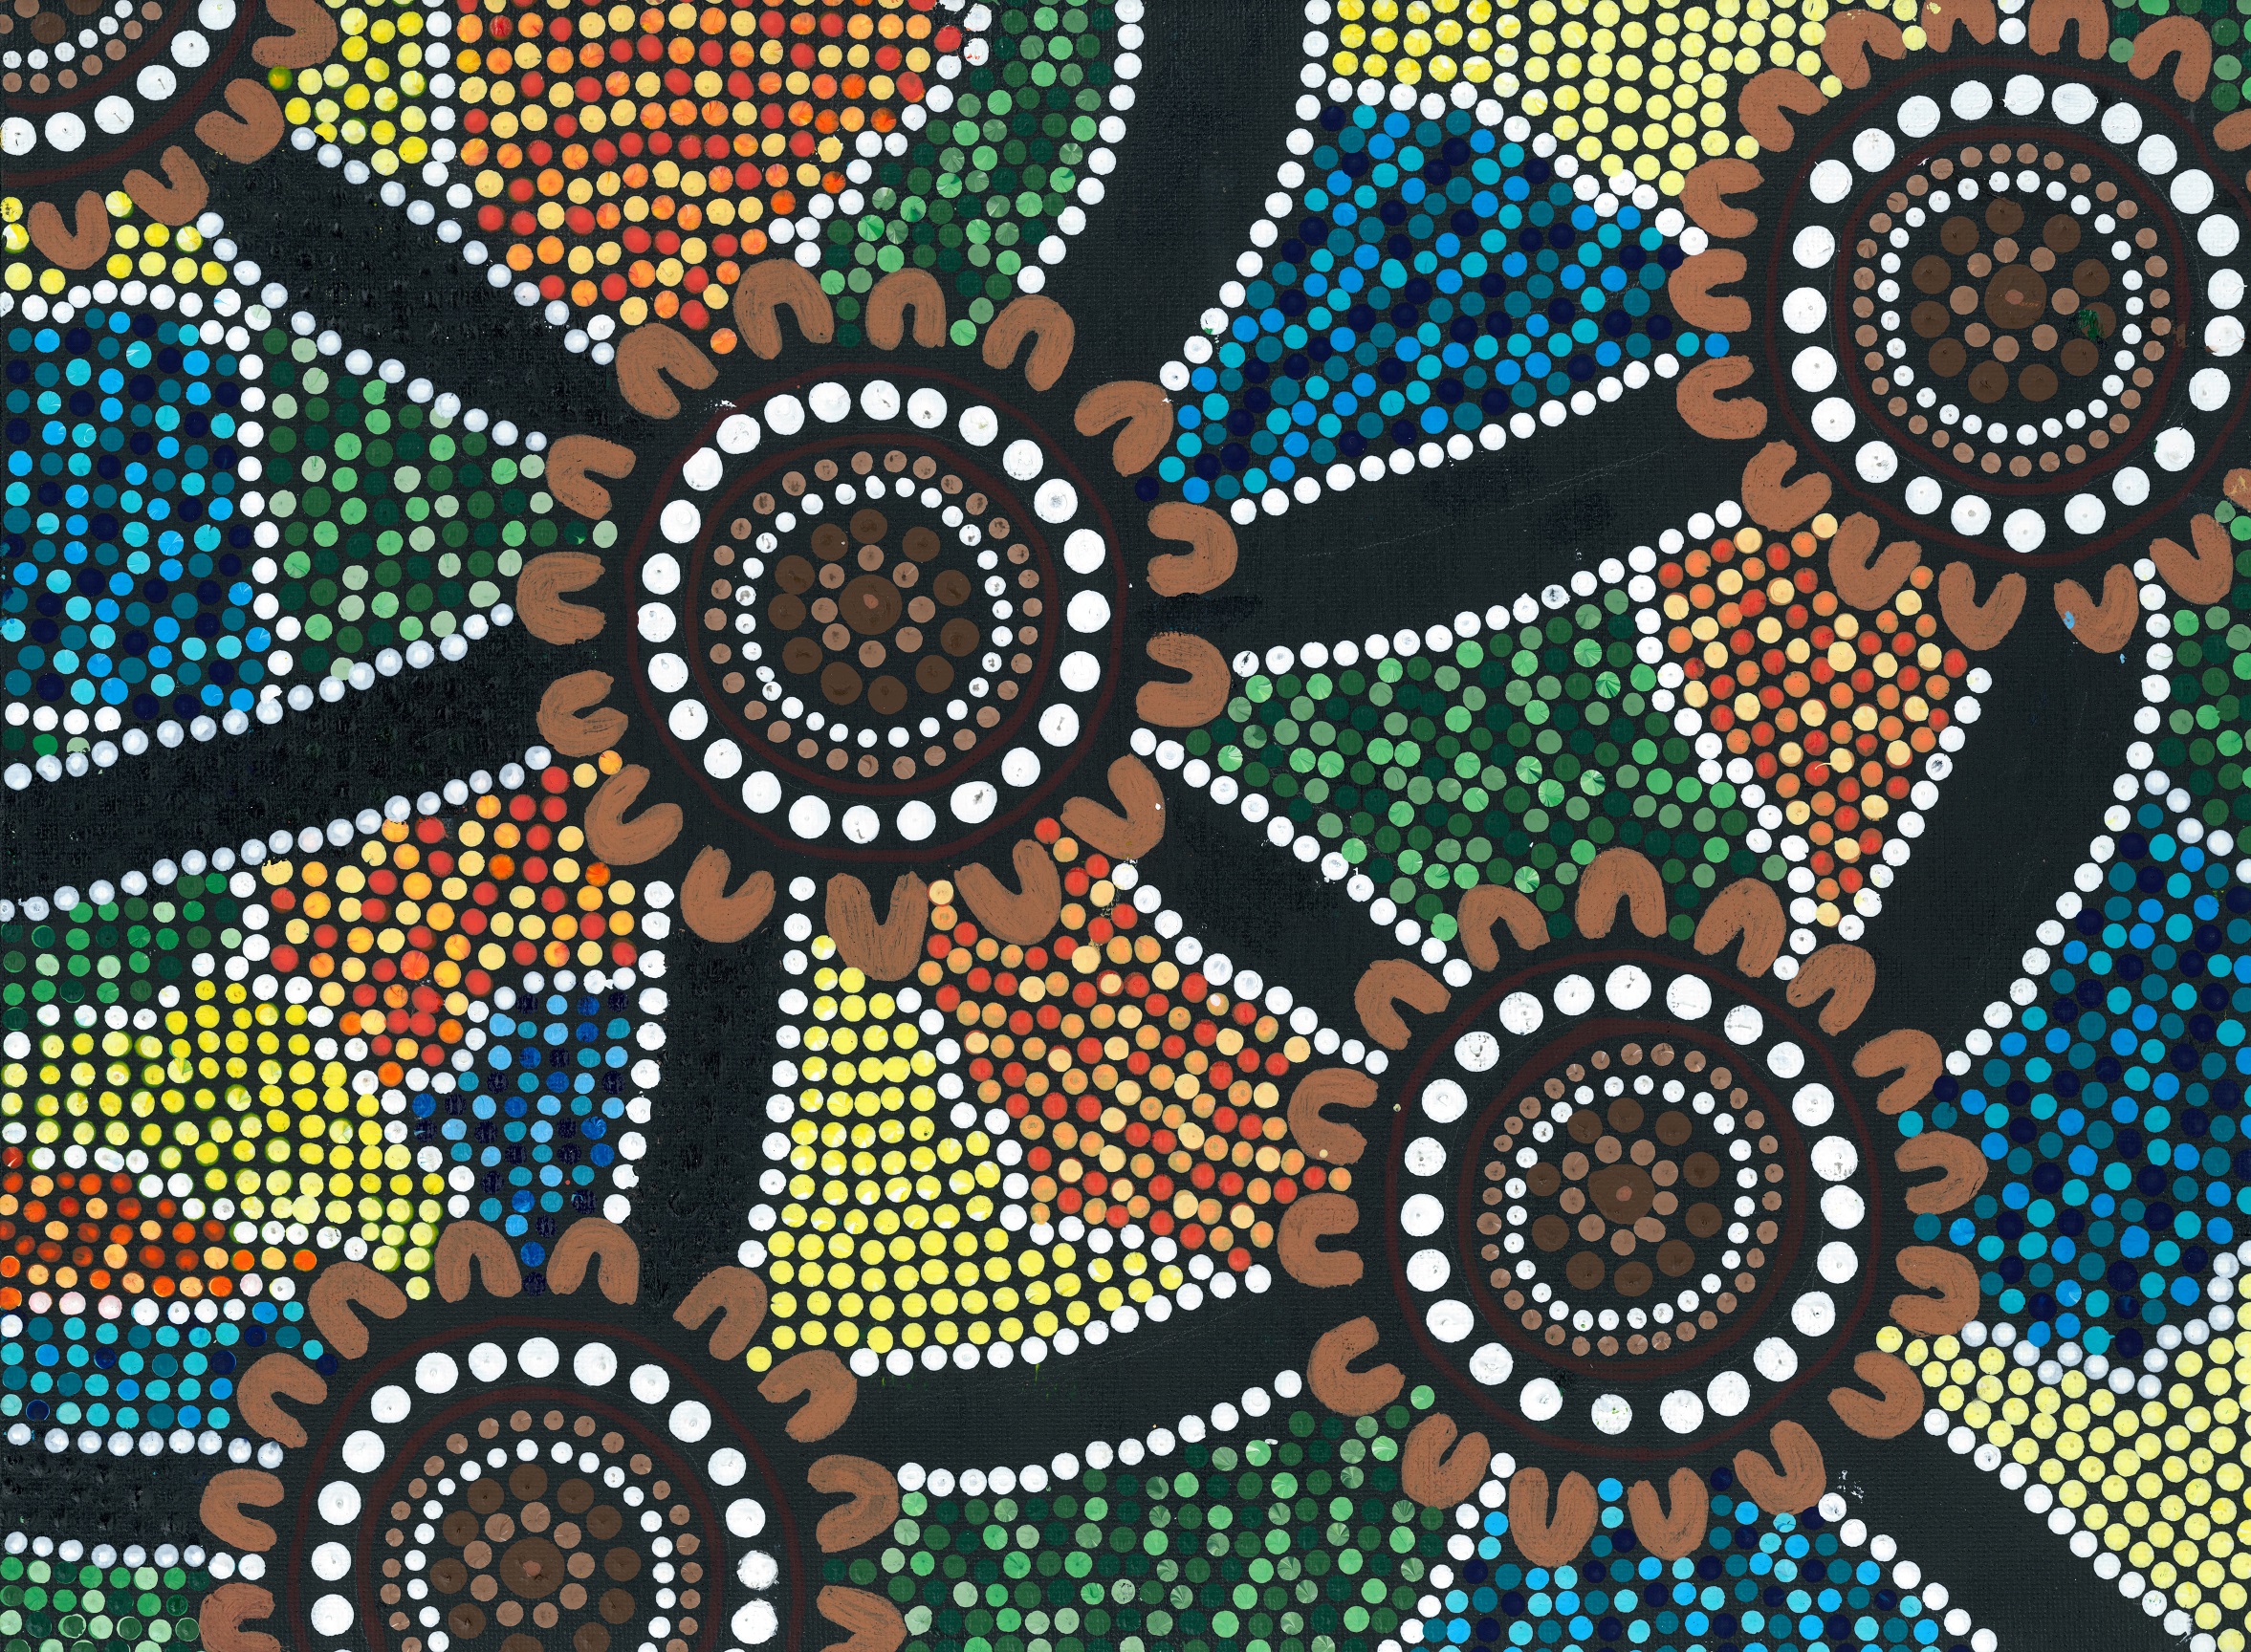 Aboriginal artwork depicting many coloured symbols and dots representing communities connected through stories and culture